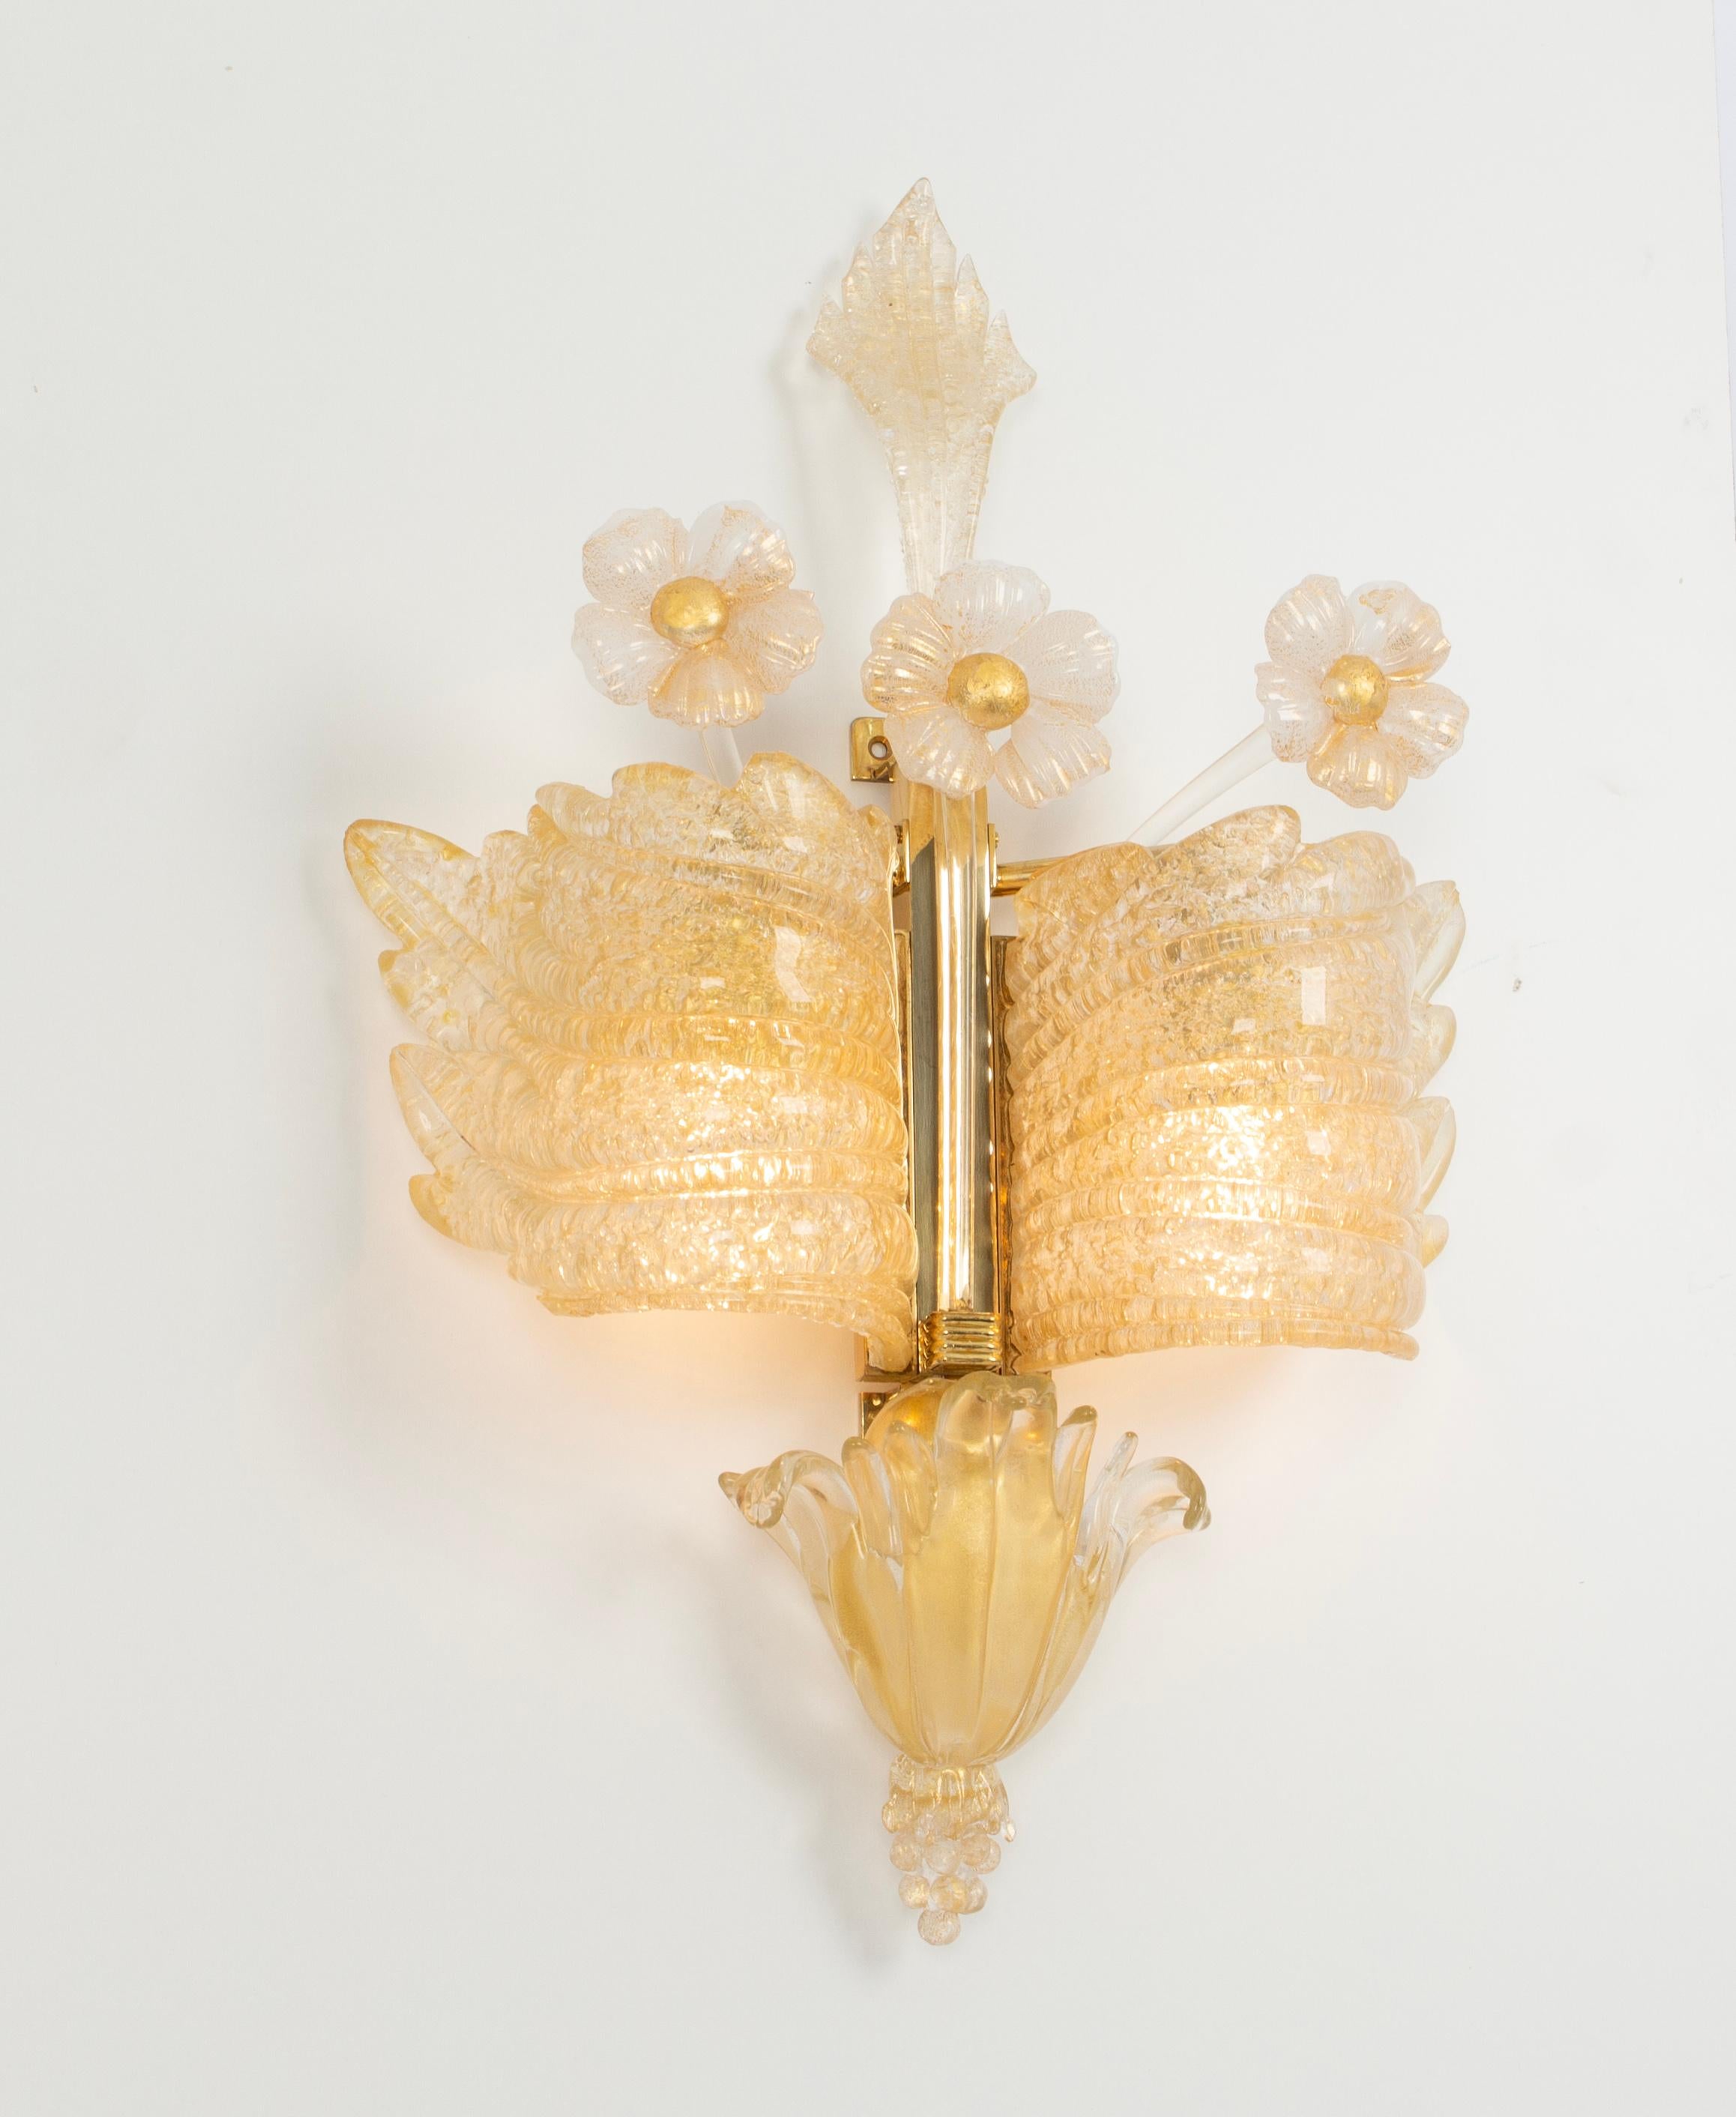 Pair of Large Murano Glass Wall Sconces by Barovier & Toso, Italy, 1970s For Sale 3